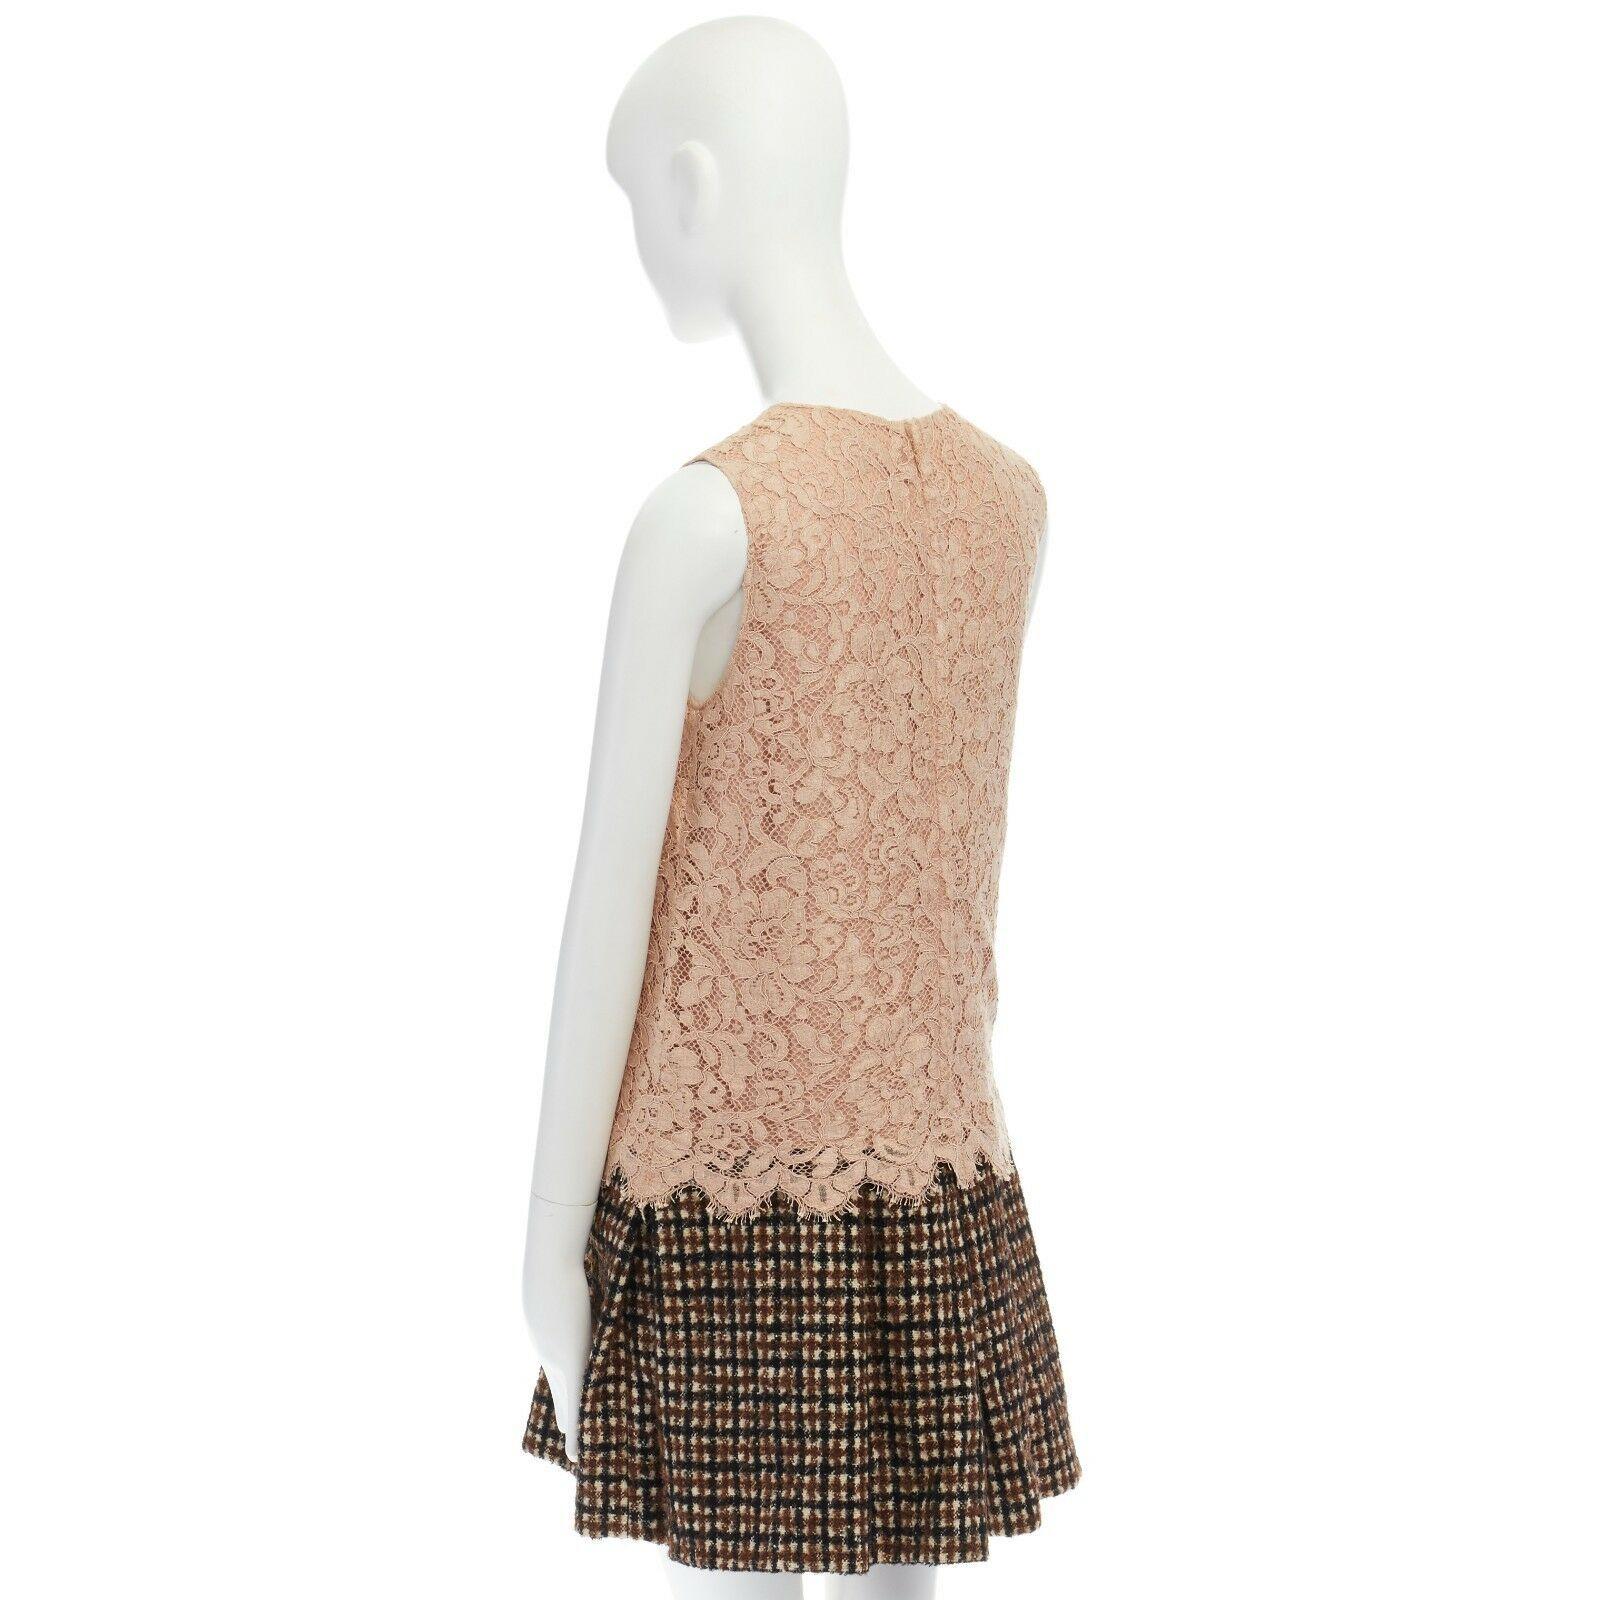 DOLCE GABBANA nude floral lace brown checked wool boucle skirt cocktail dress S 3